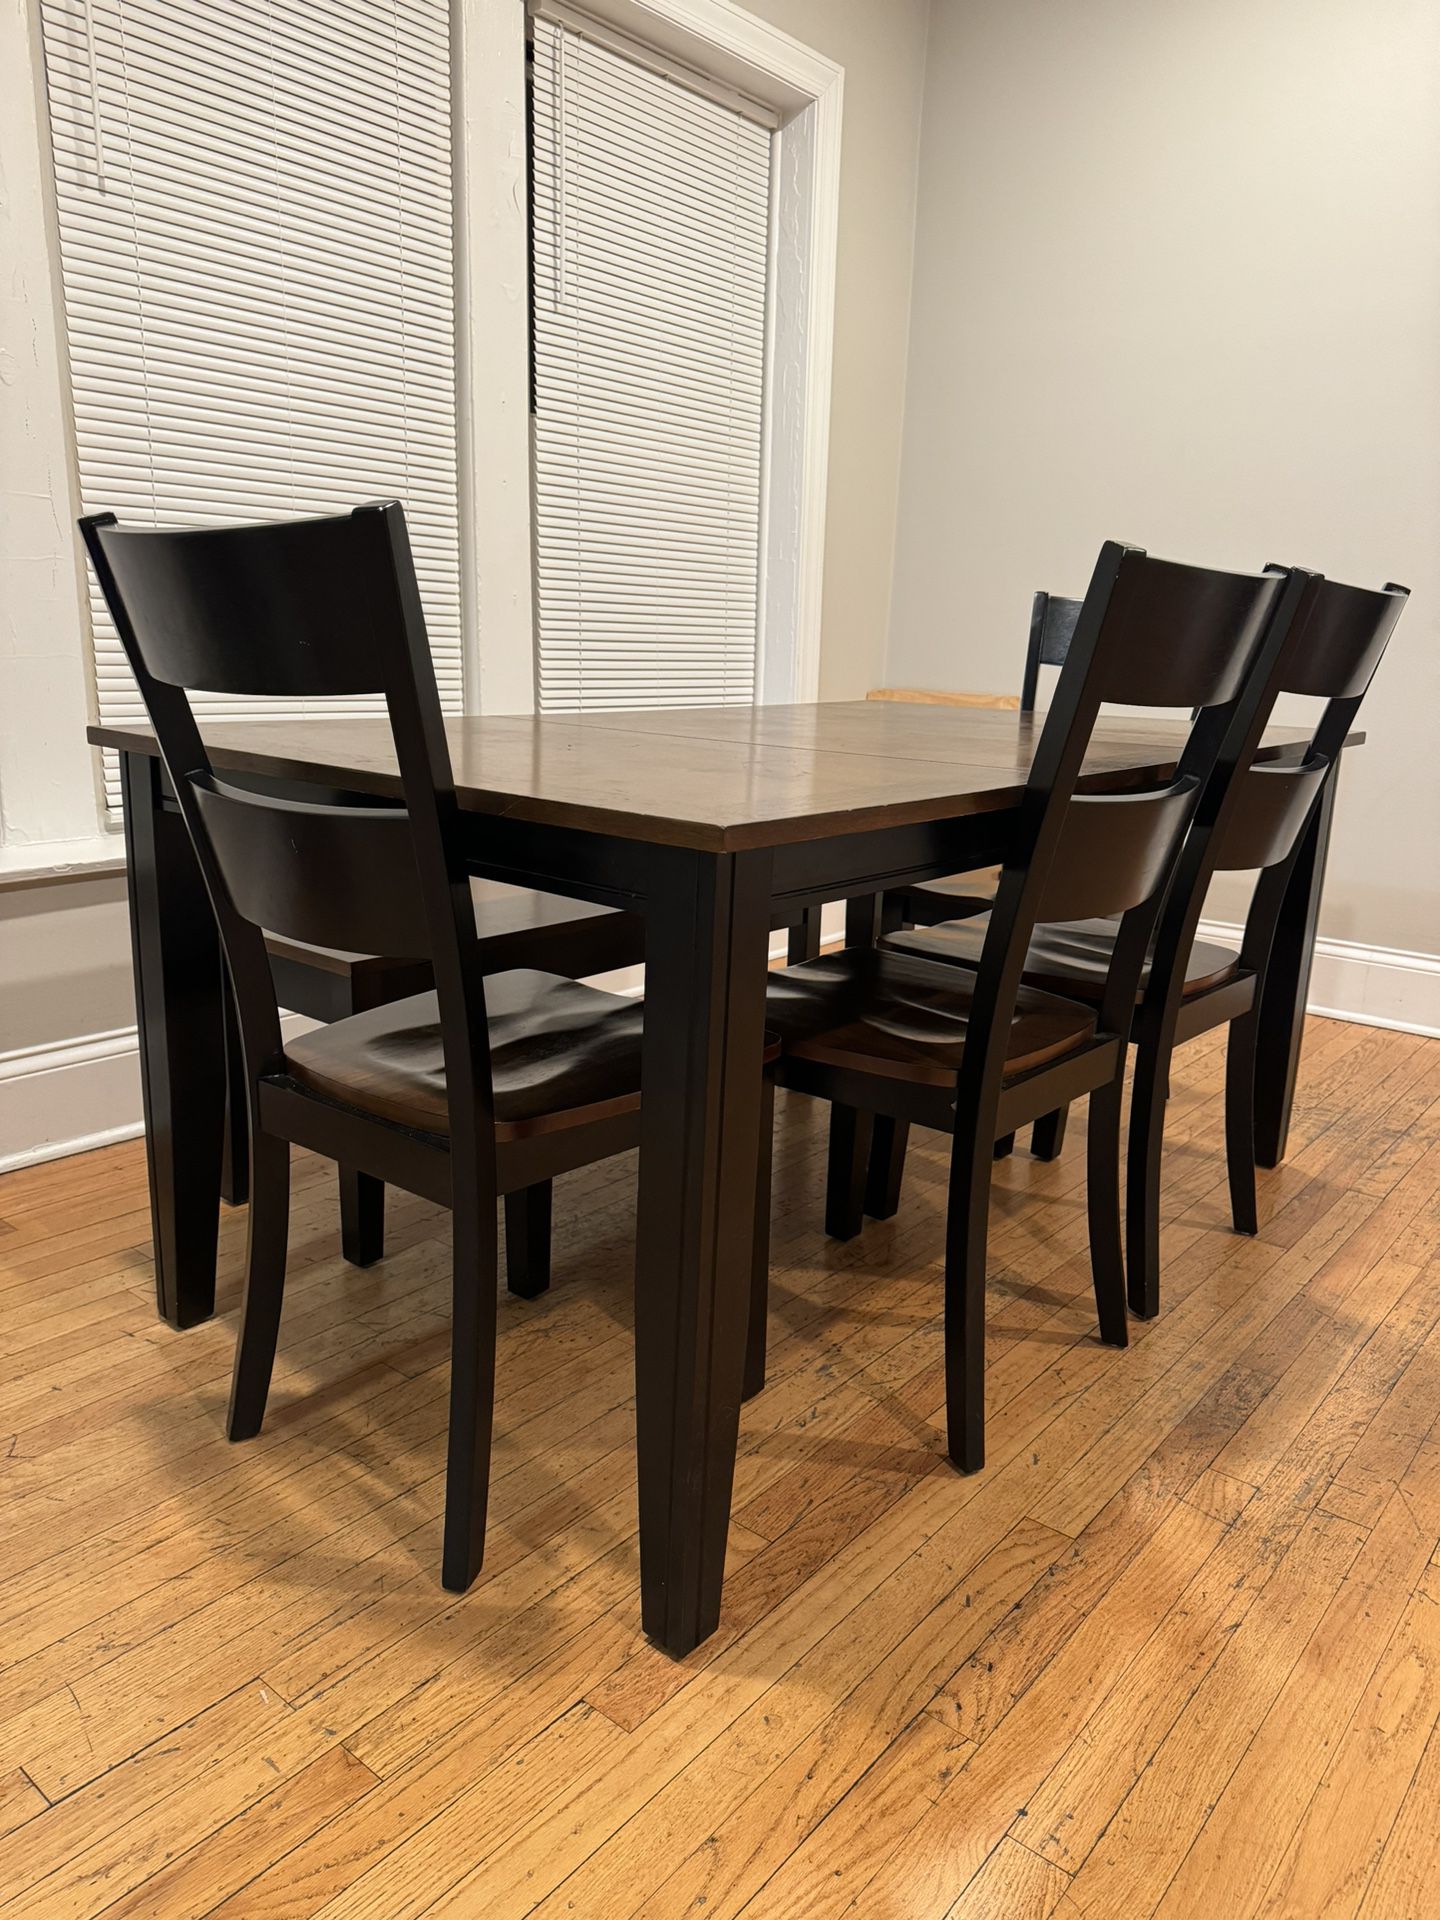 6 Piece - Blake Dining Room Table (pick up only)